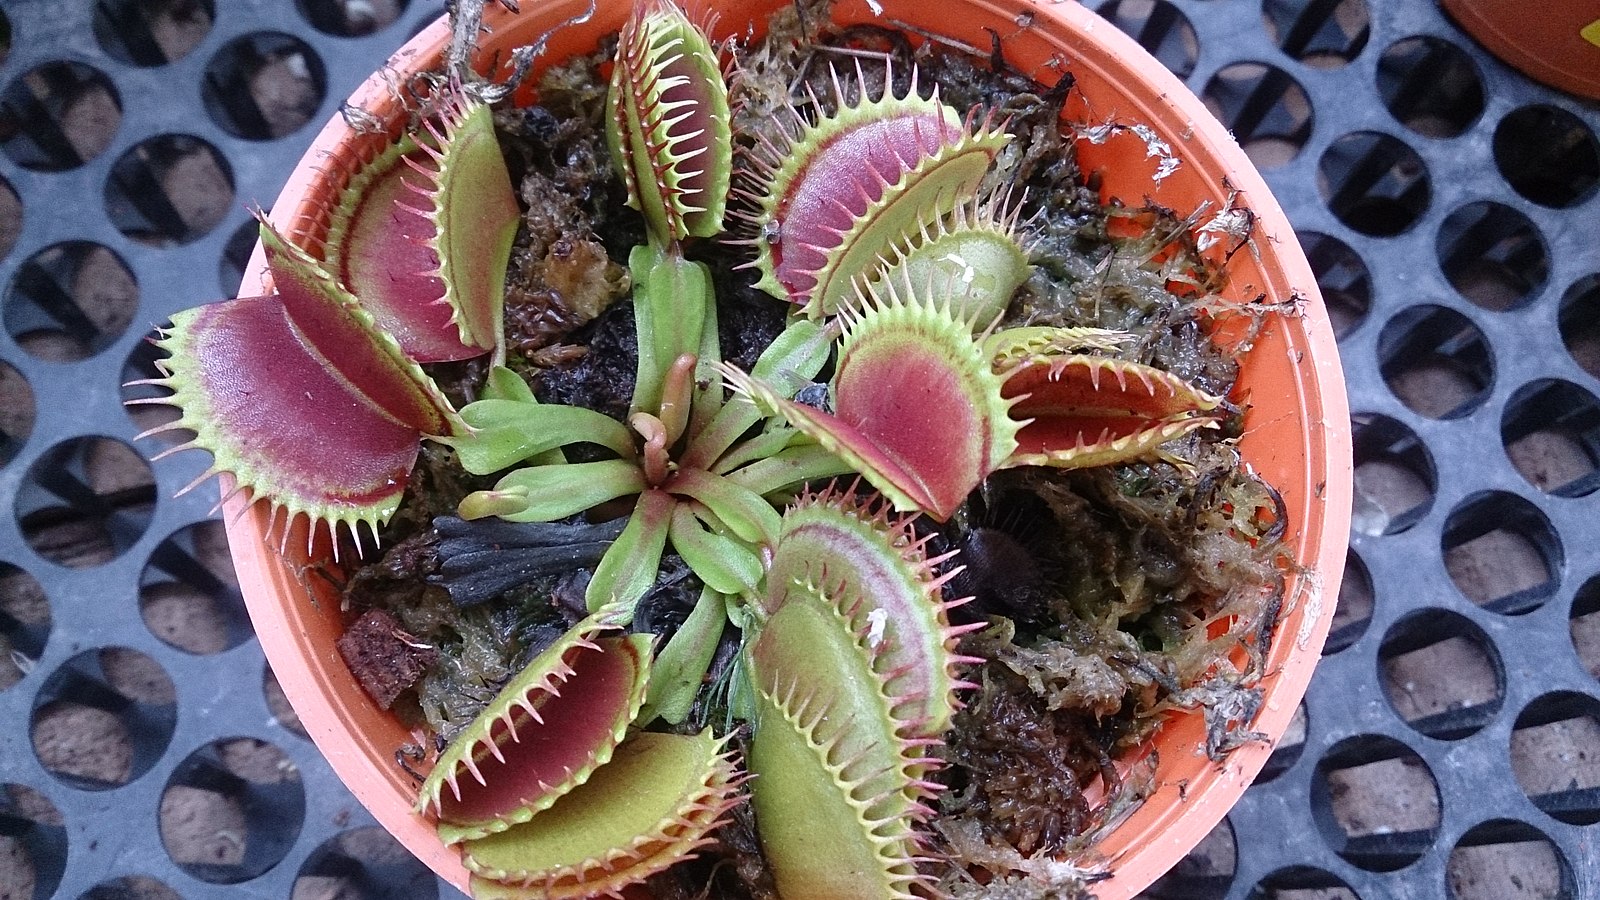 Venus fly trap with many heads in a red pot viewed from above